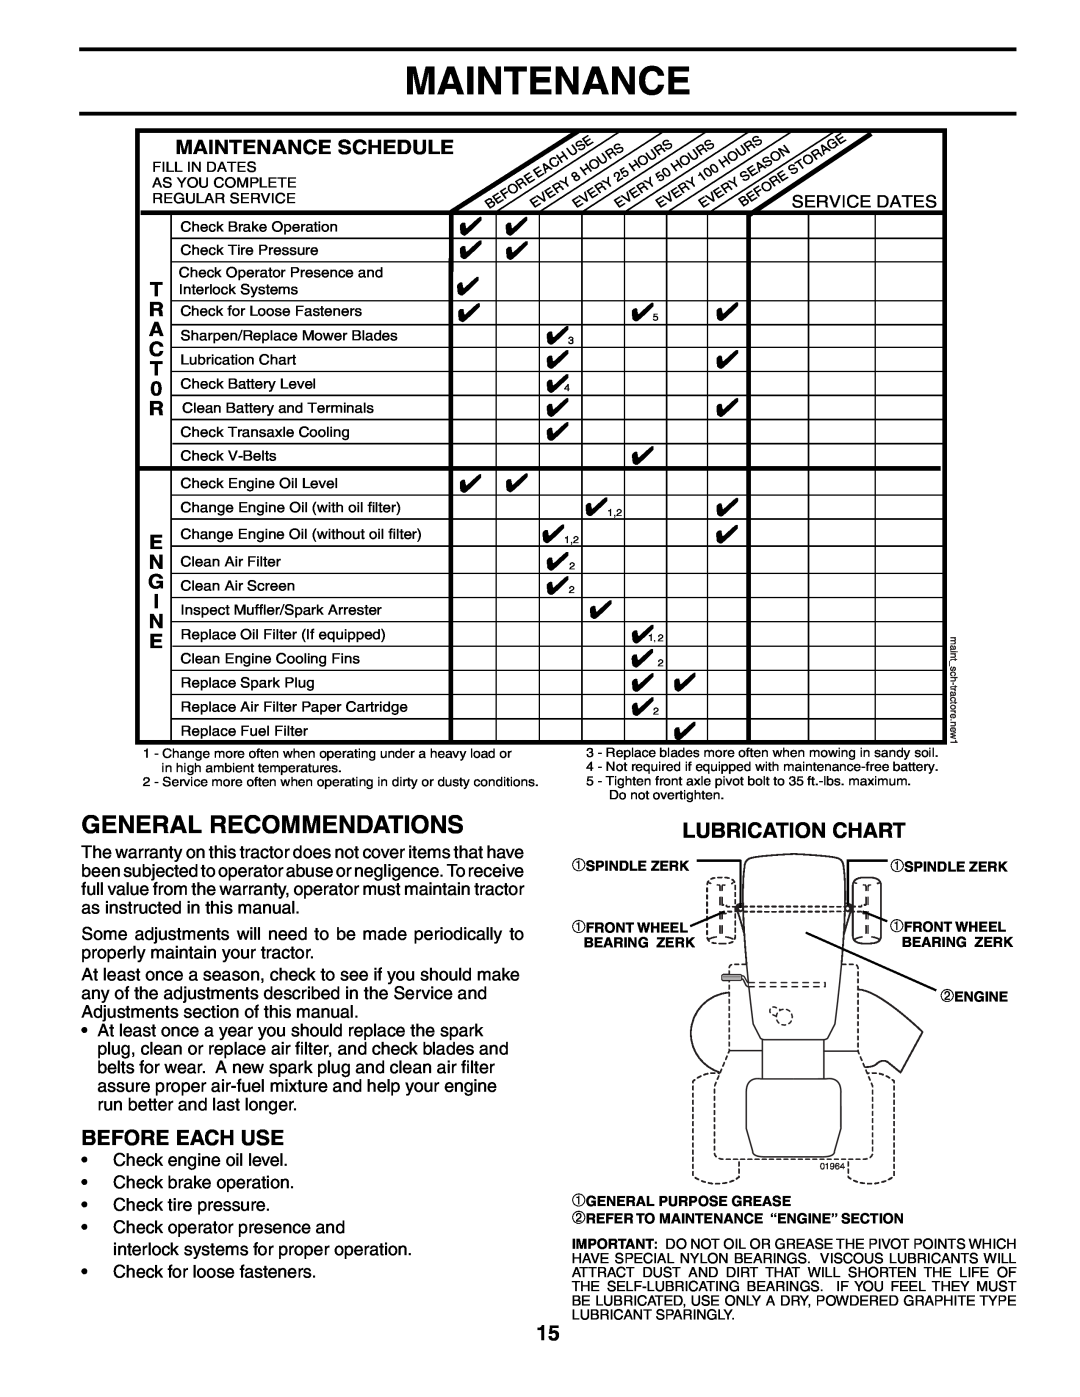 Poulan 191984 manual General Recommendations, Before Each Use, Lubrication Chart, Maintenance Schedule 